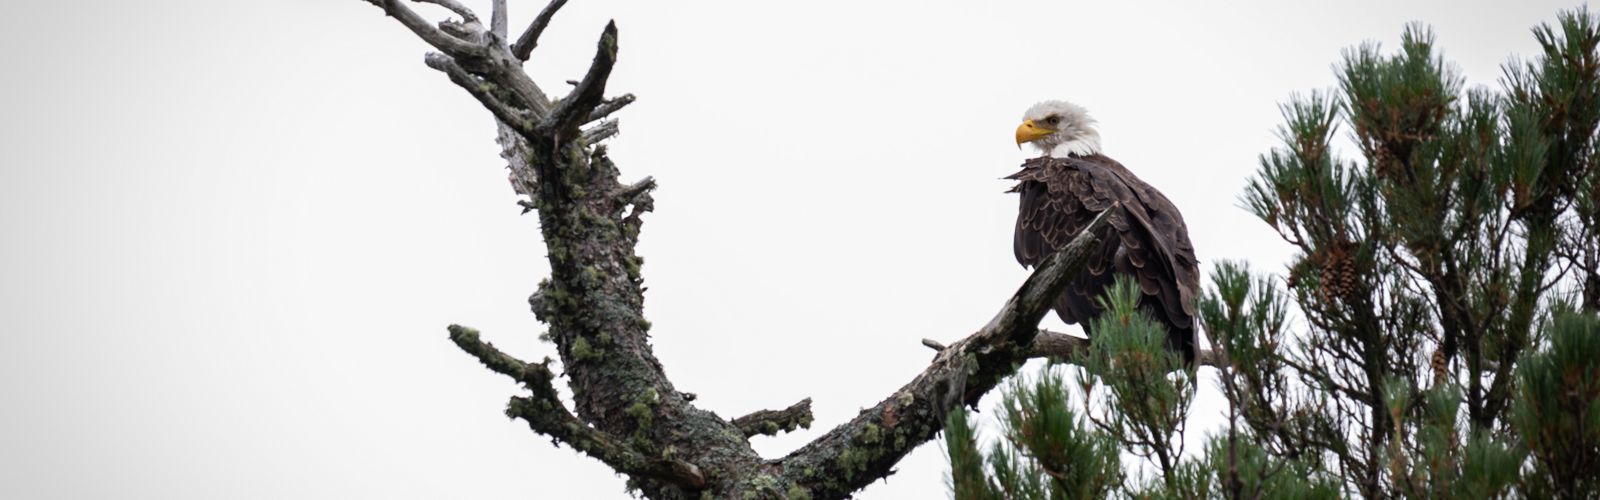 A bald eagle perched in a tree. 